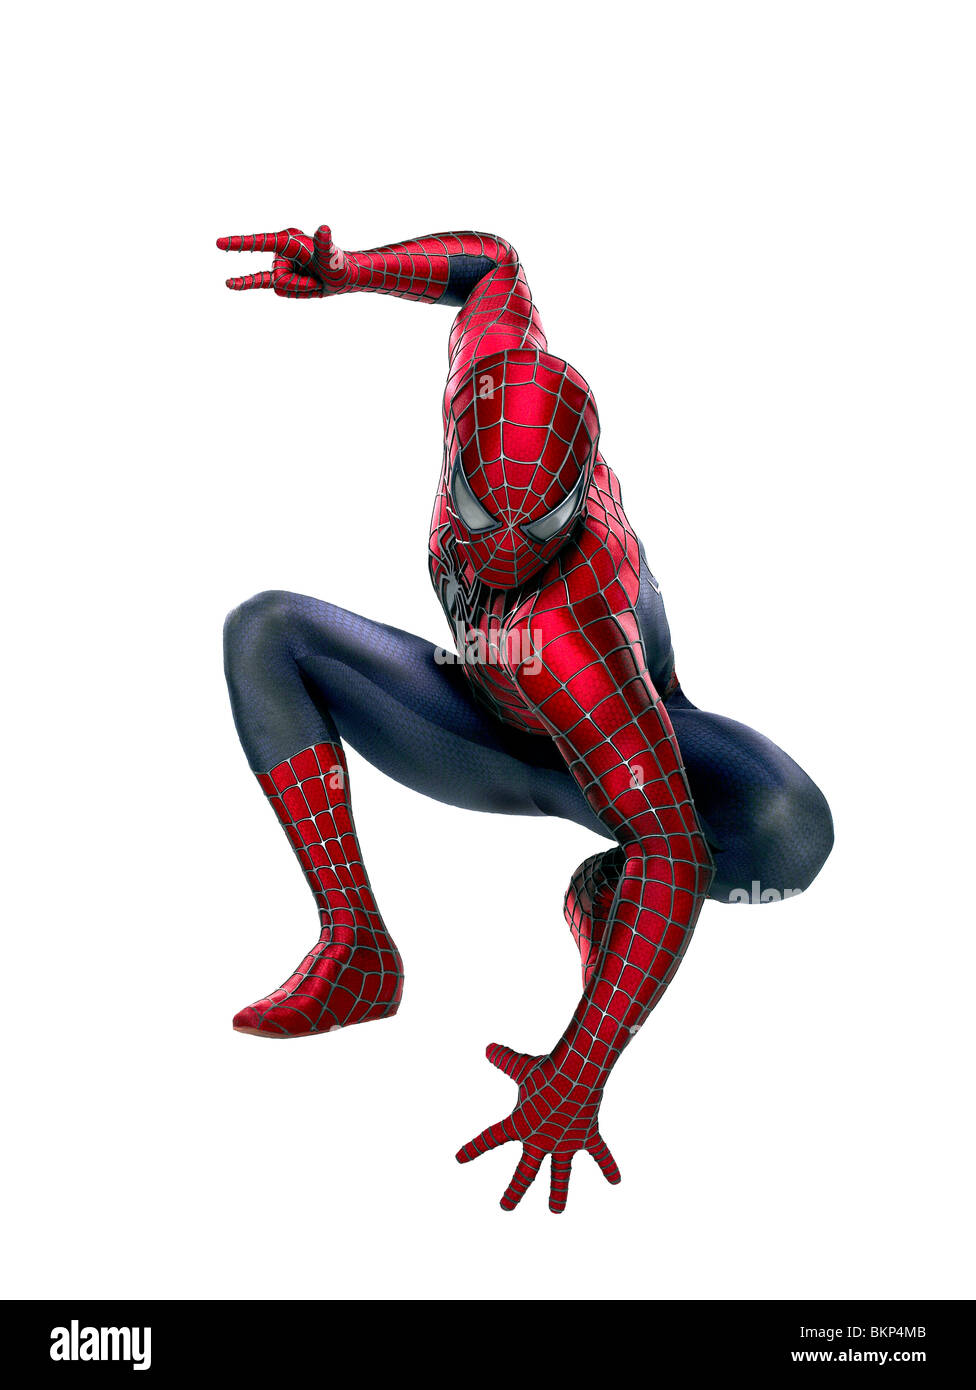 Spider man Cut Out Stock Images & Pictures - Alamy